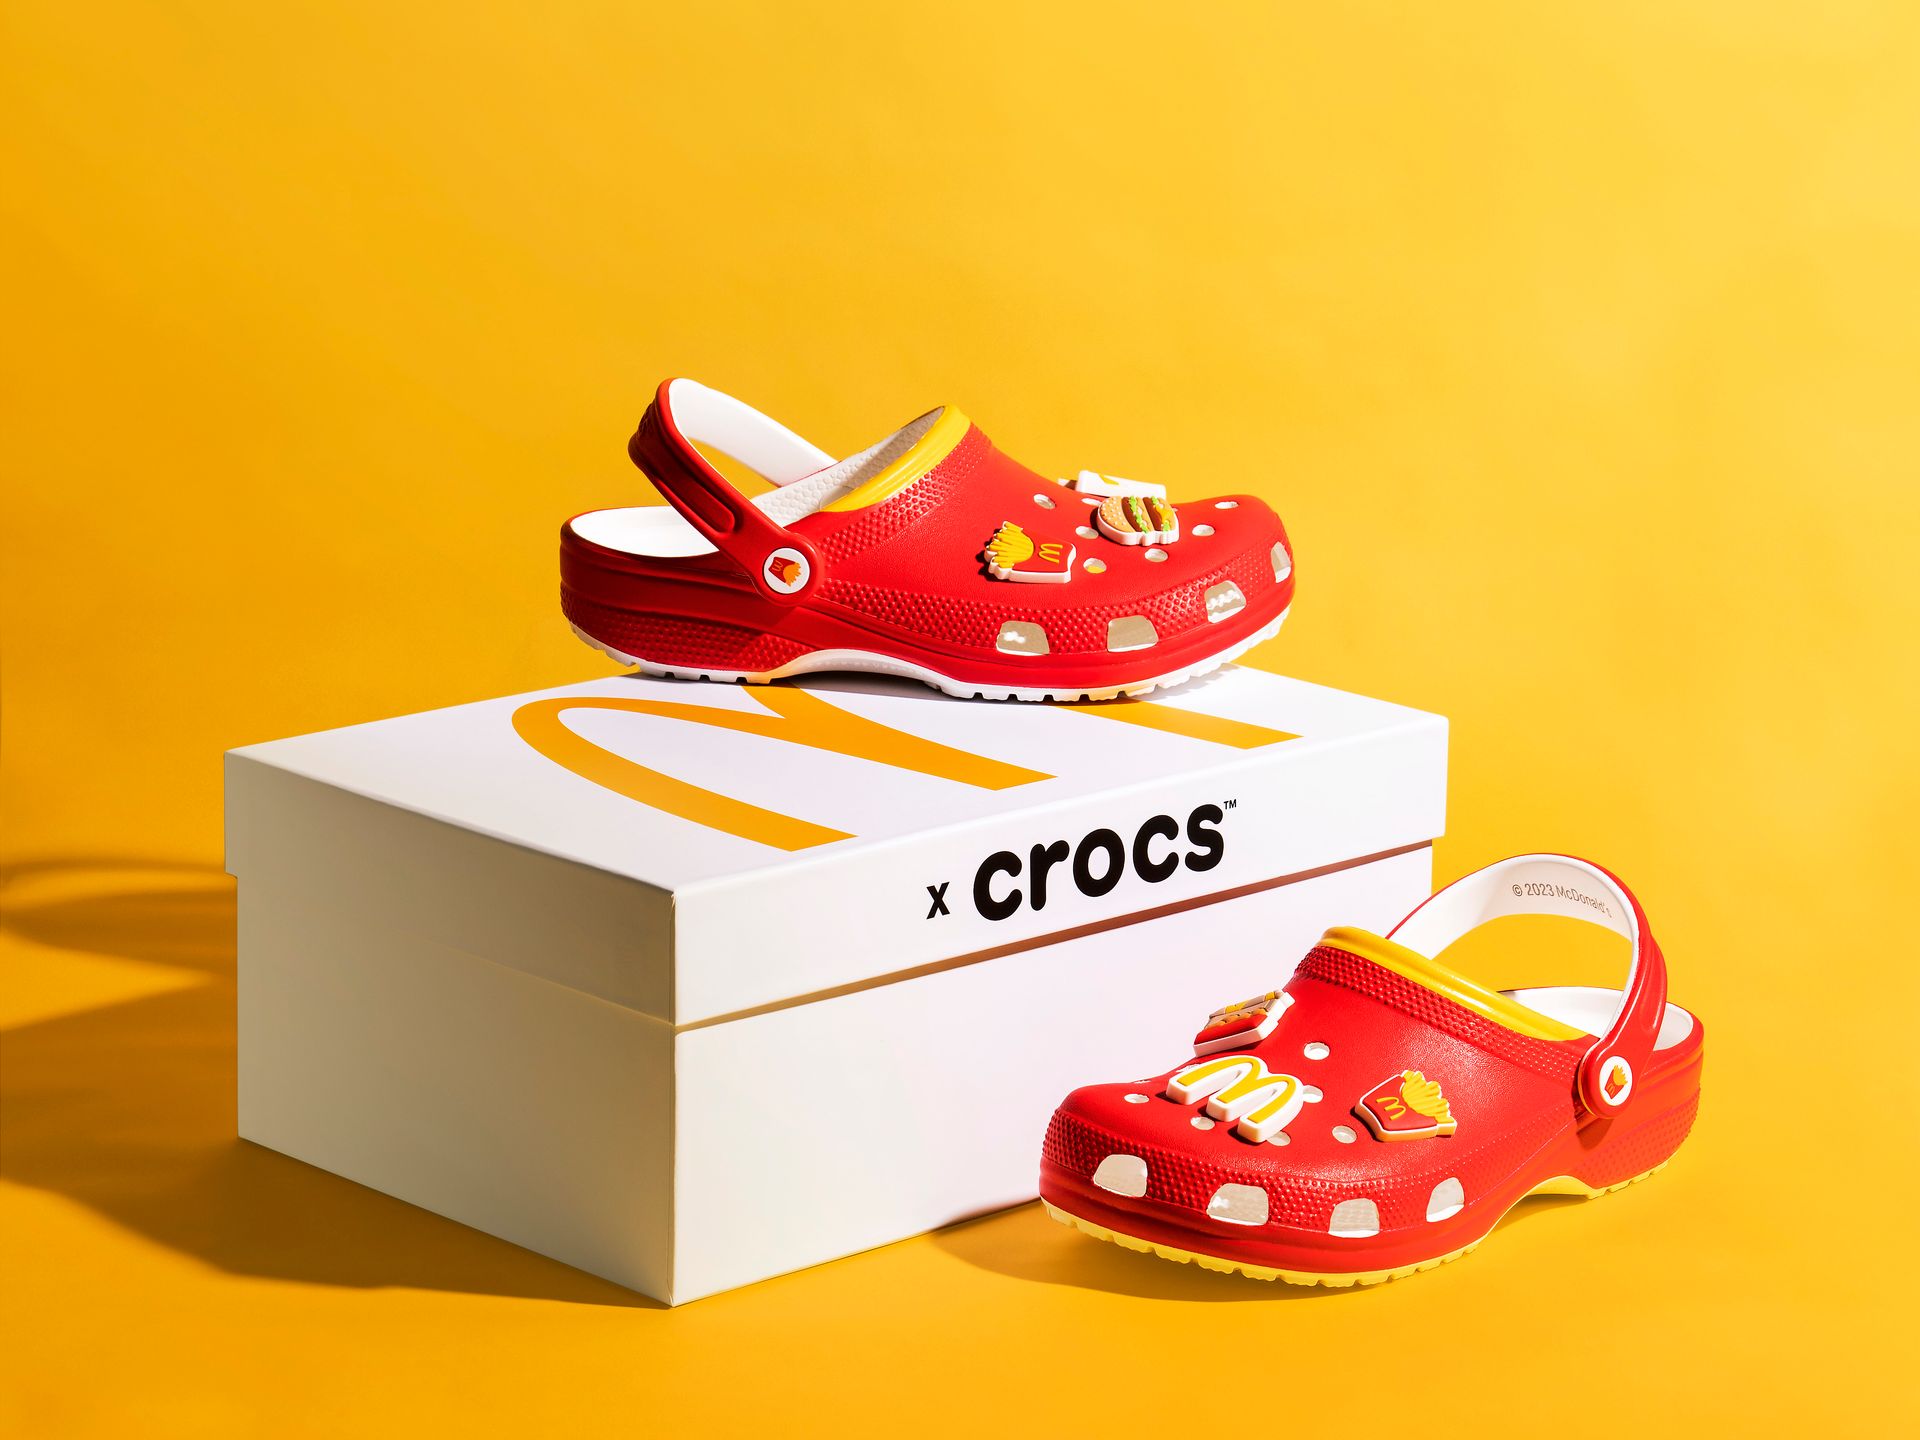 McDonalds is serving up Crocs: Here's how to win a pair